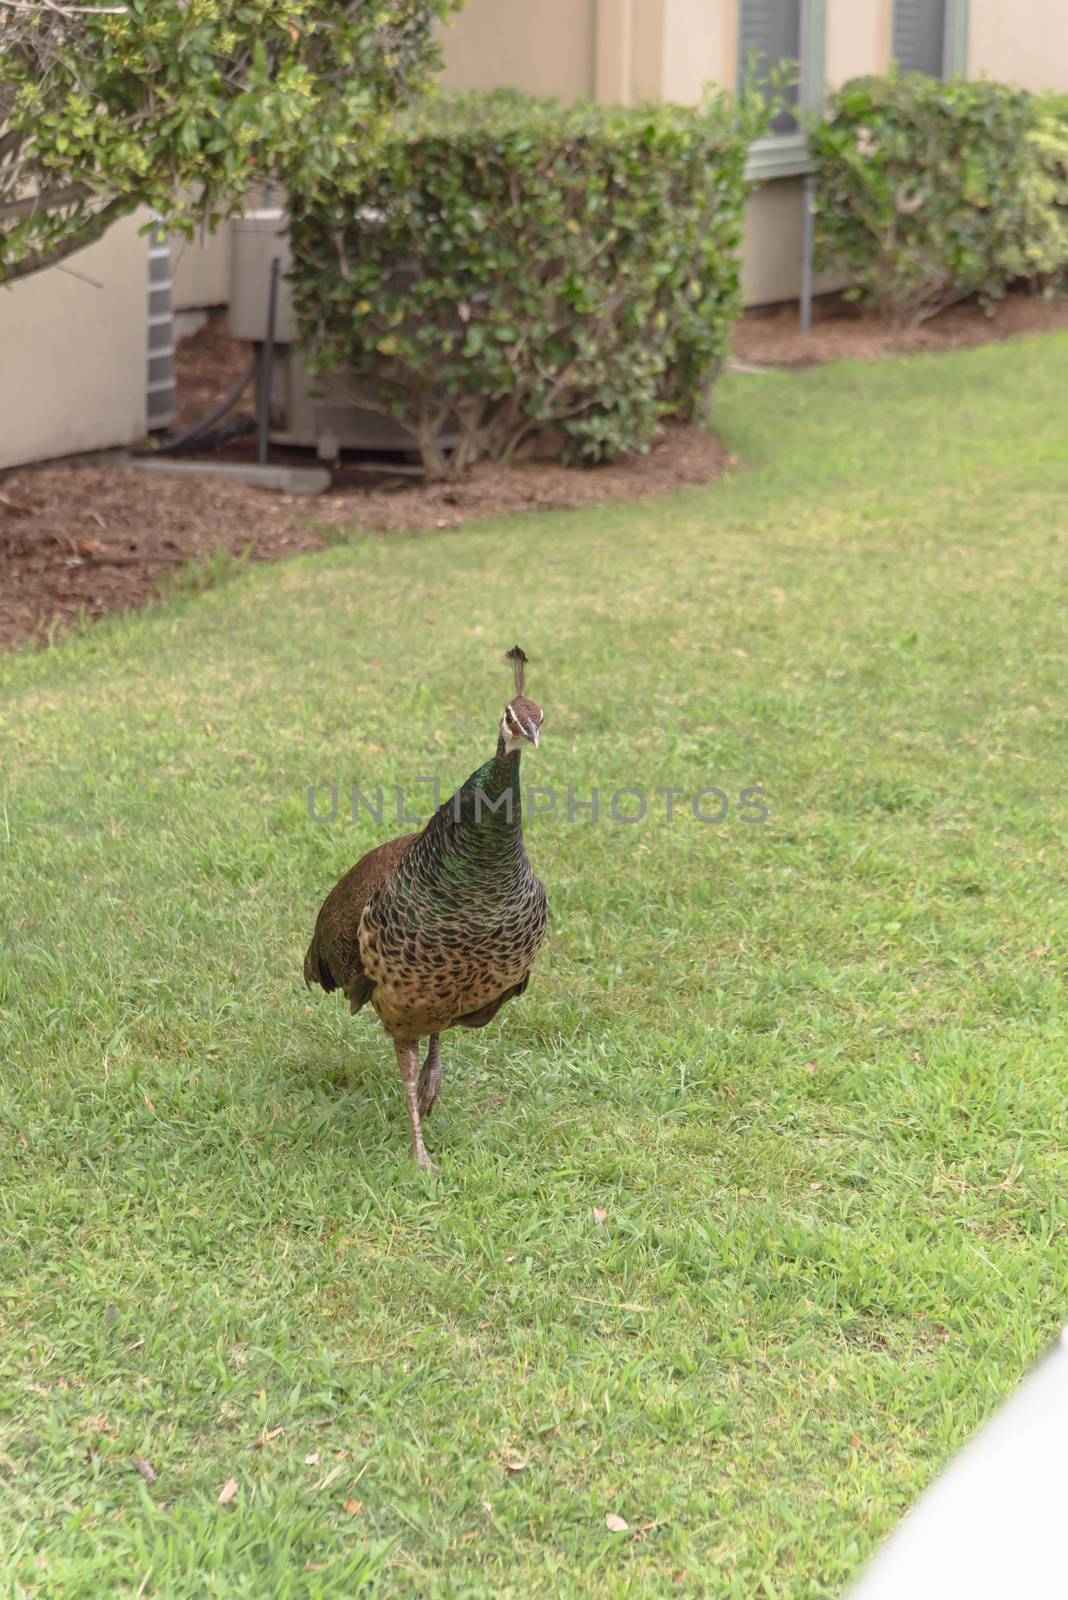 Peacock at apartment complex outside of Houston, Texas, USA by trongnguyen